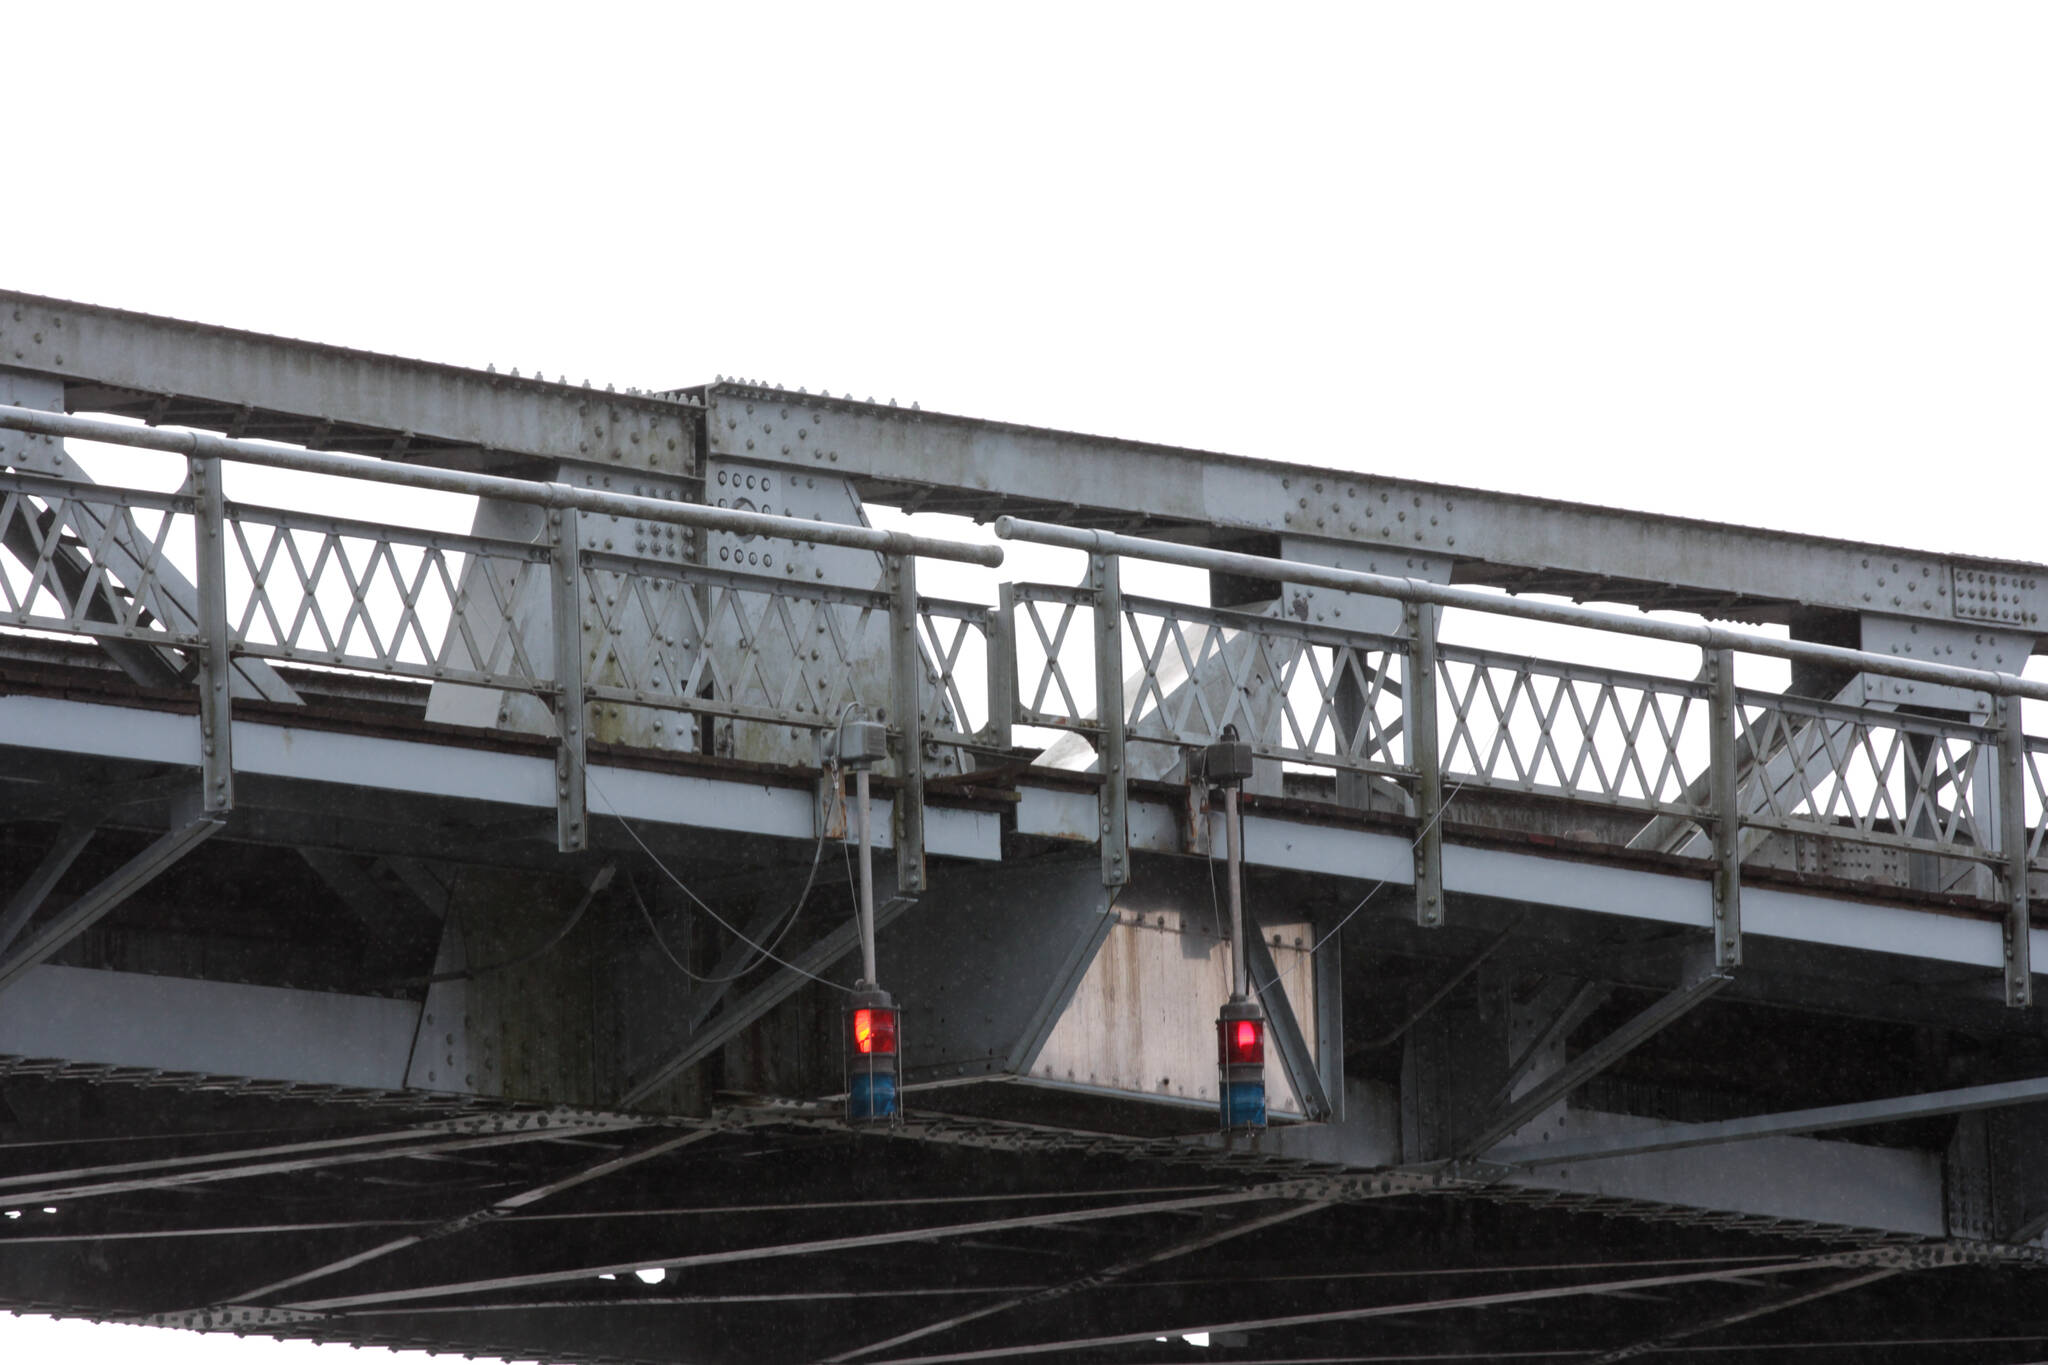 An electrical fault disabled the Simpson Avenue Bridge over the Hoquiam River for several hours on Monday. (Michael S. Lockett / The Daily World)